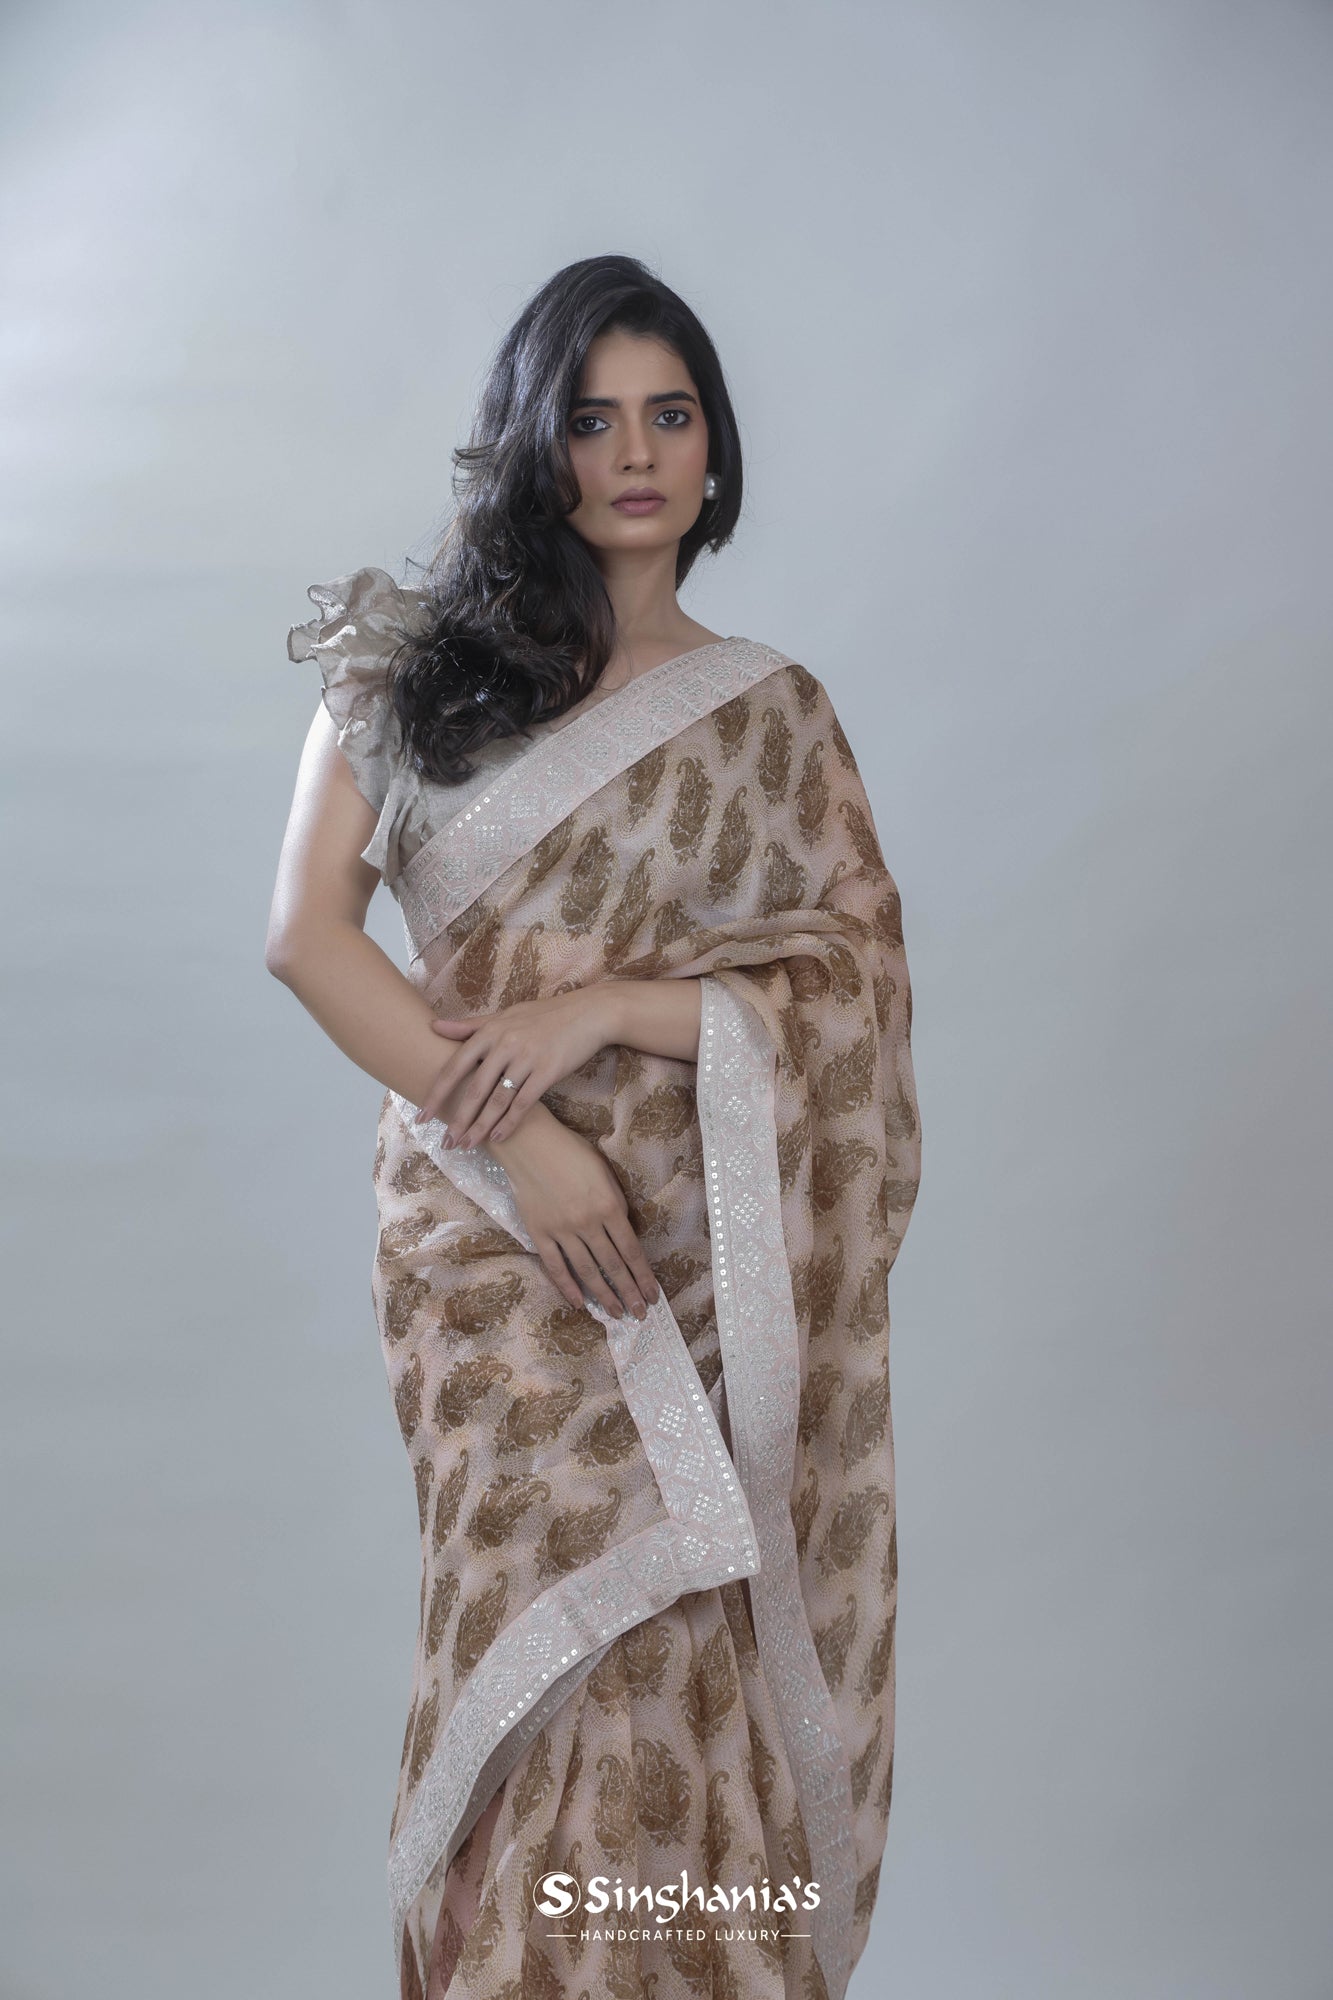 Misty Rose Pink Printed Organza Saree With Floral Paisley Design